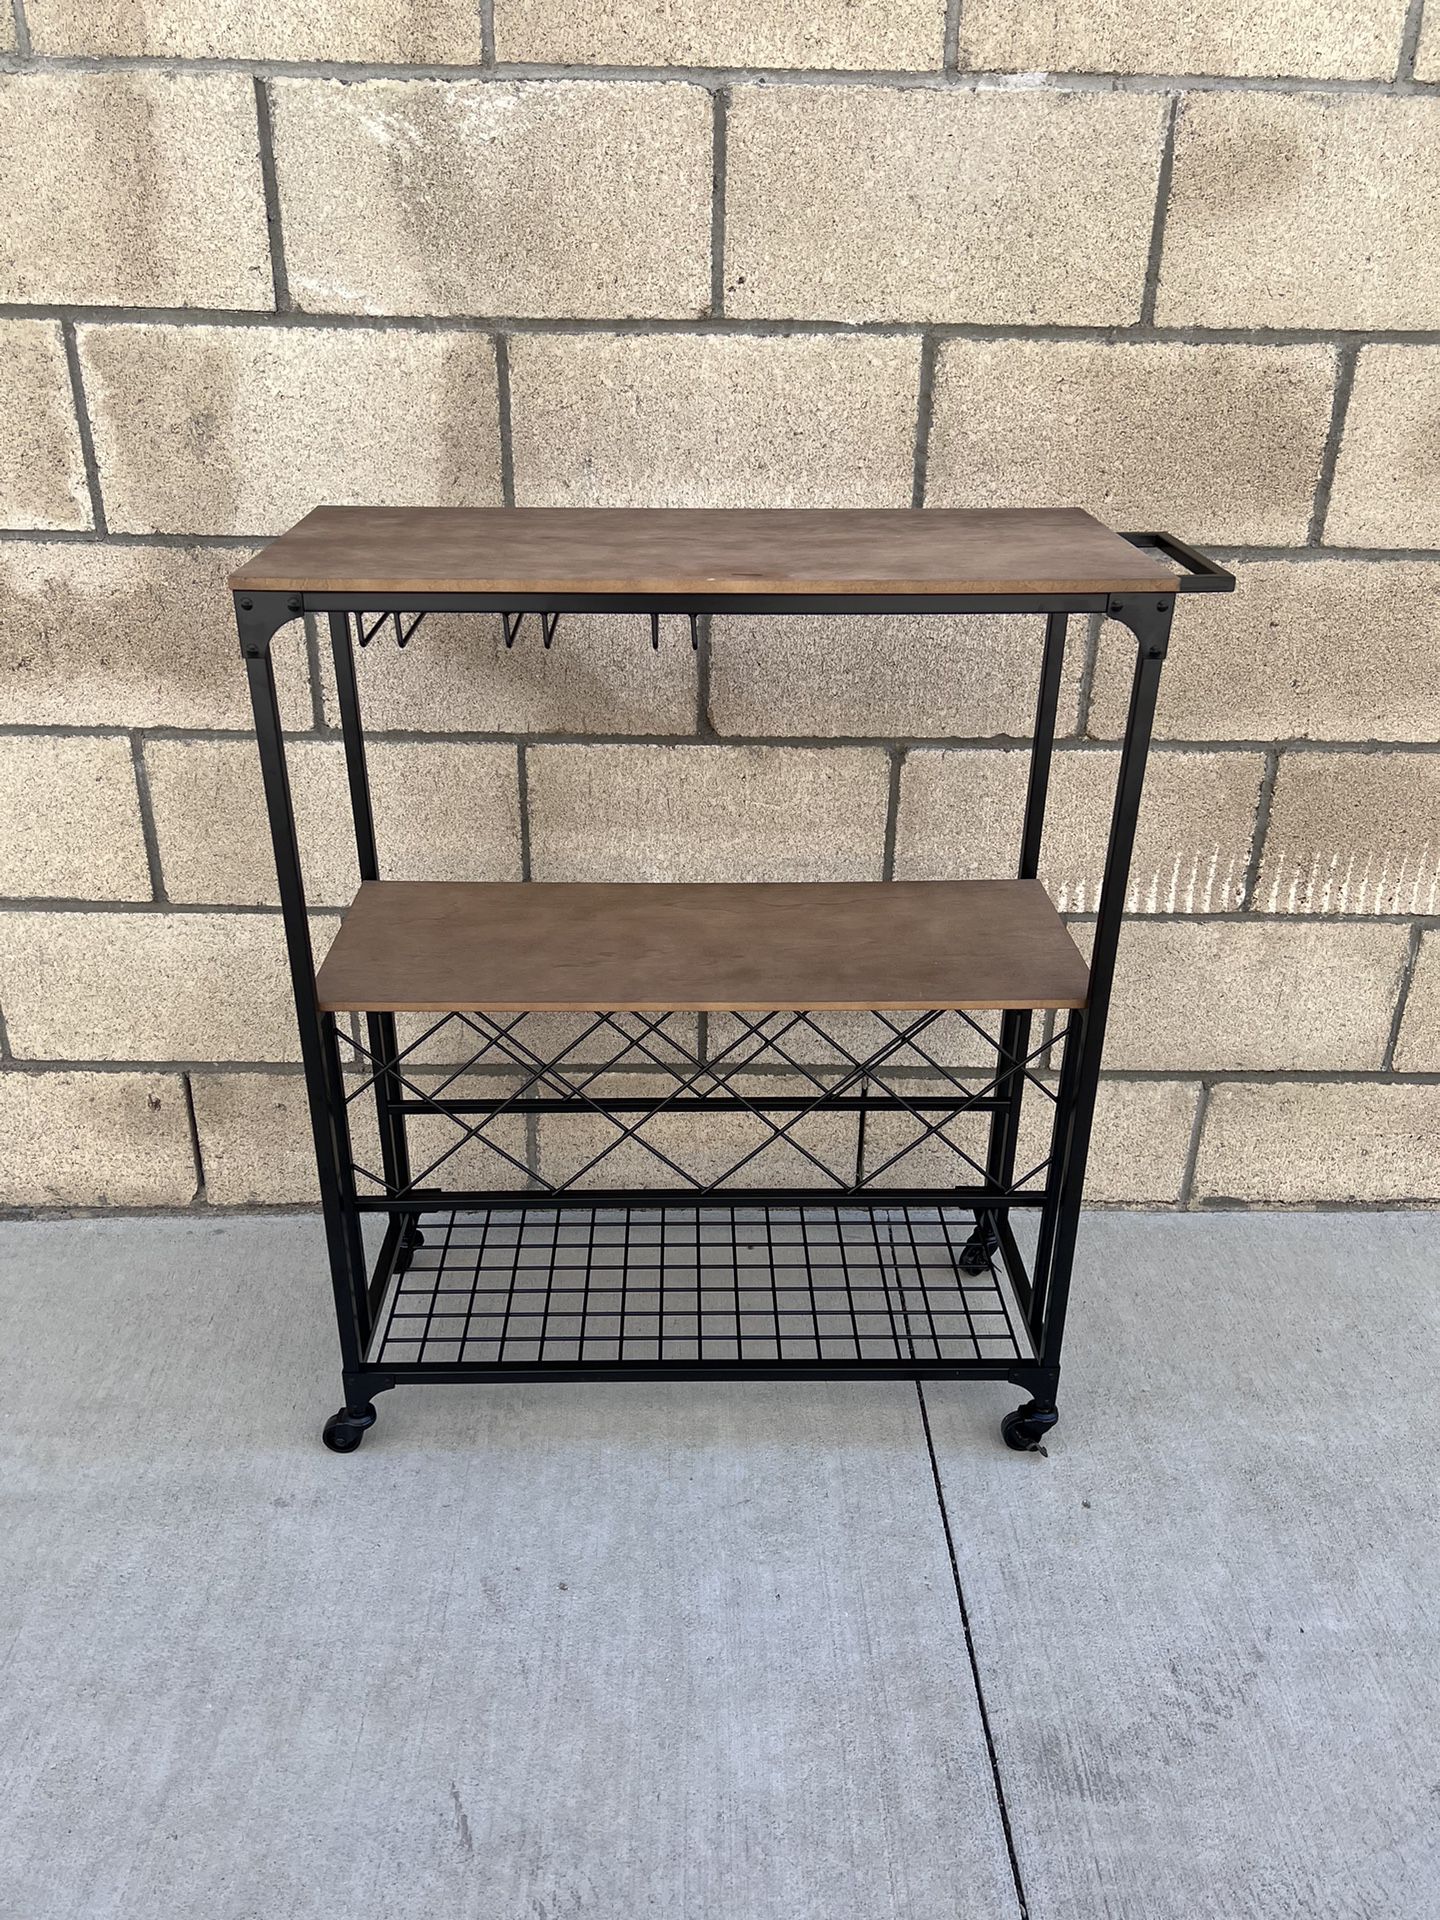 NEW Black & Brown Brackenhill Rolling Bar Cart **New in box** **FIRM PRICE**